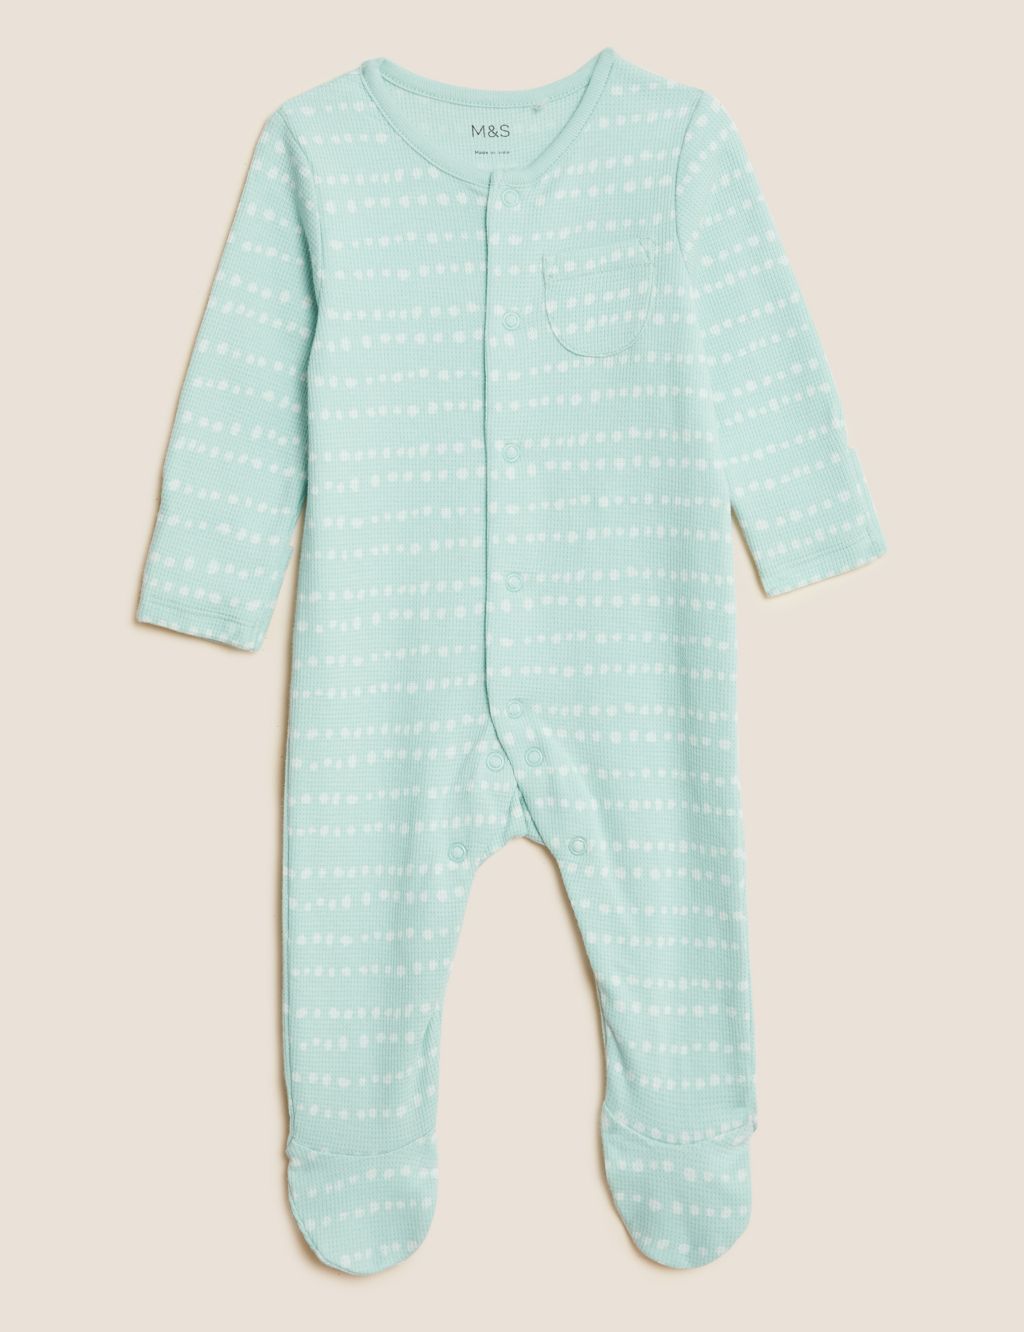 3pk Pure Cotton Striped Sleepsuits (61/2lbs - 3 Yrs) image 3